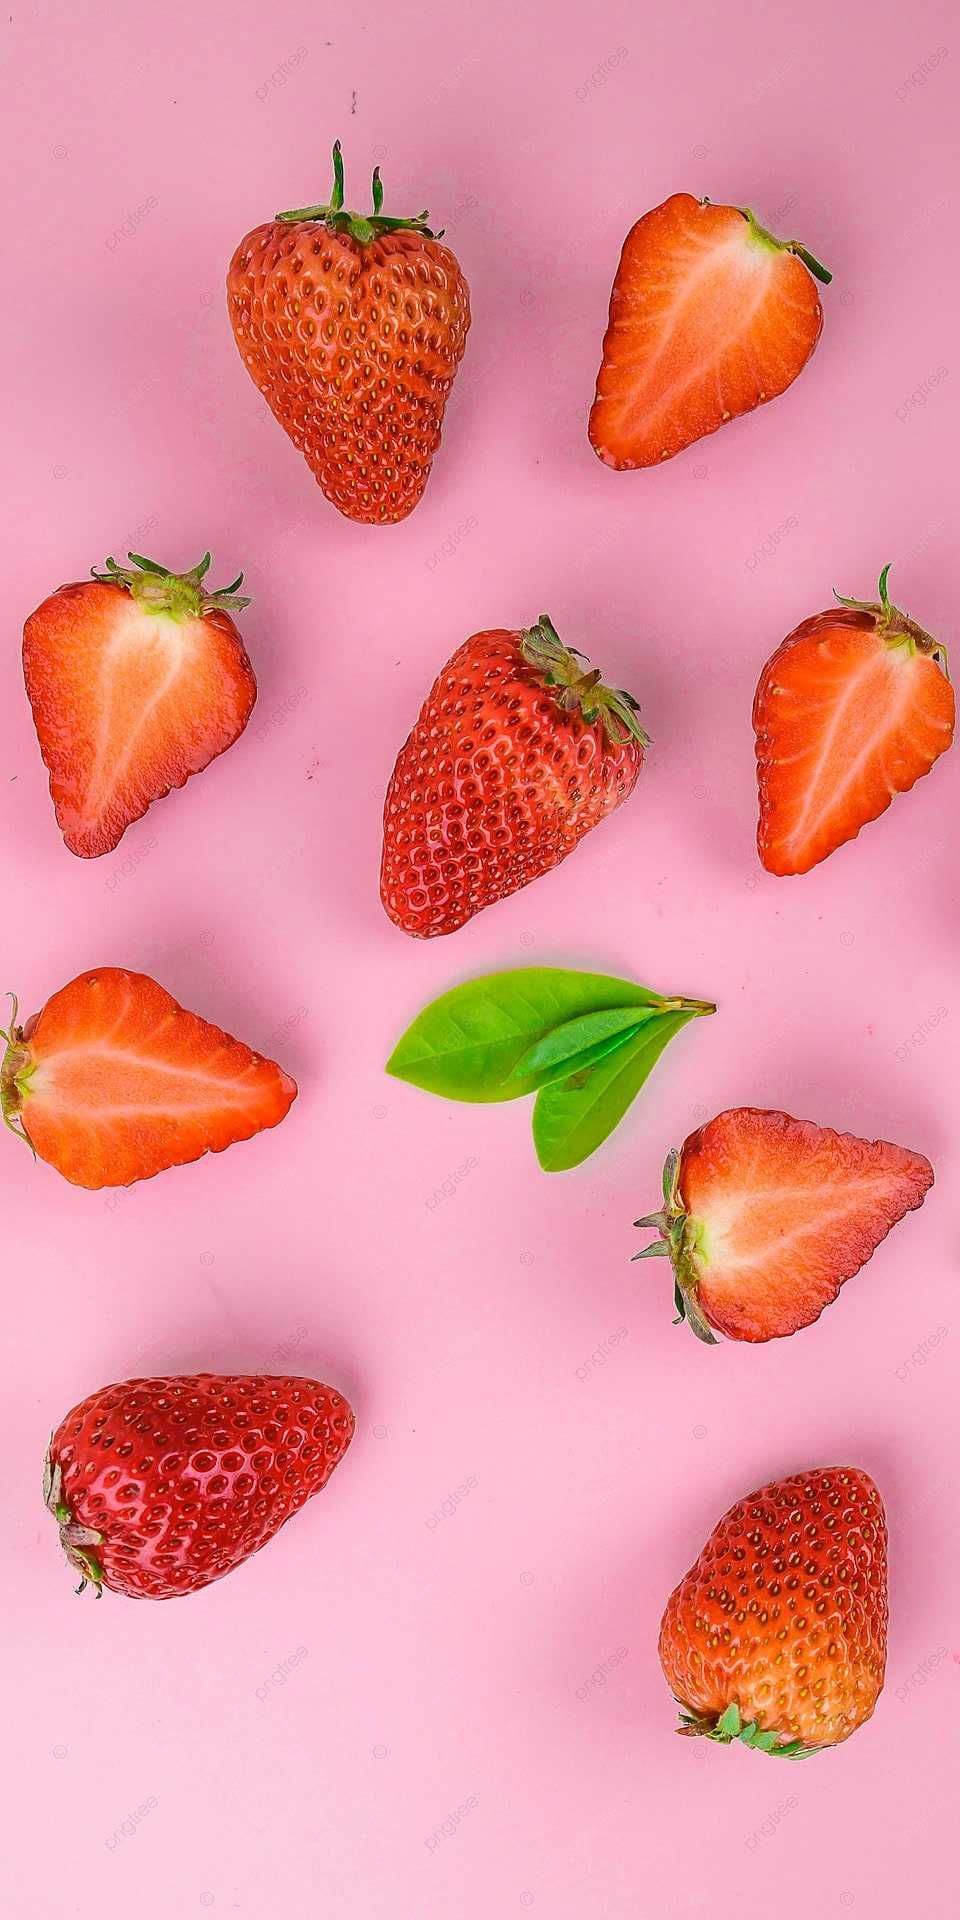 Strawberry Wallpaper Discover more Aesthetic, Background, Cute, Desktop, iPhone wallpaper. /strawberr. Wallpaper, Strawberry, Pink wallpaper